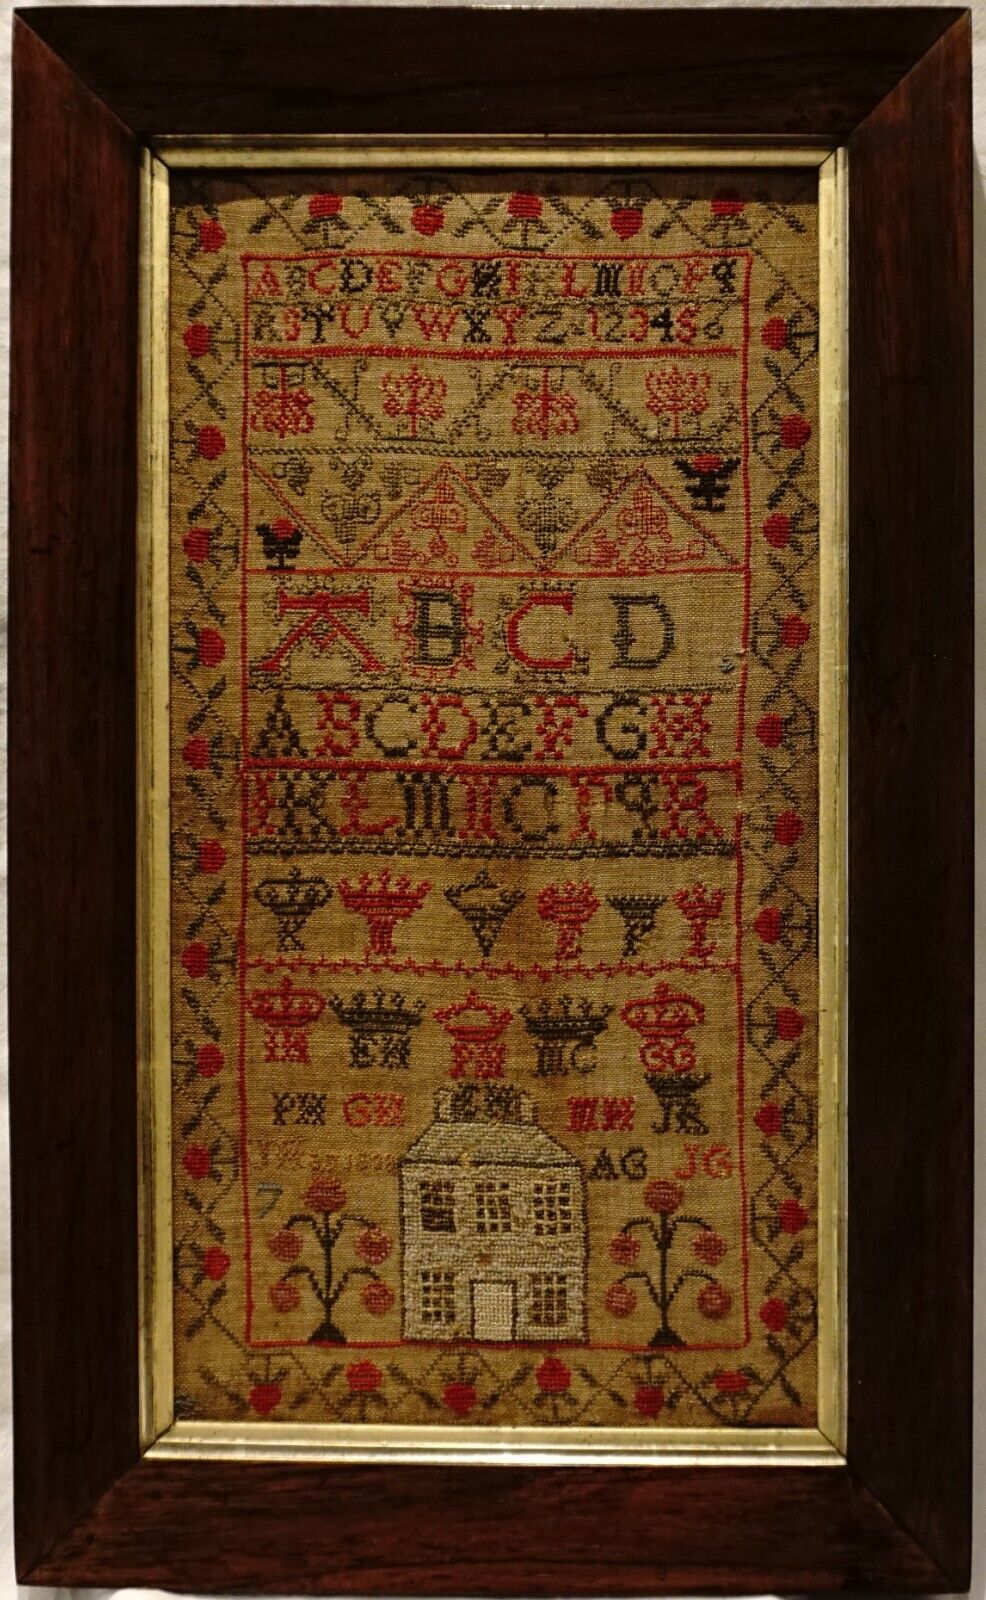 EARLY 19TH CENTURY HOUSE, MOTIF & ALPHABET SAMPLER BY J.HAY - 1838